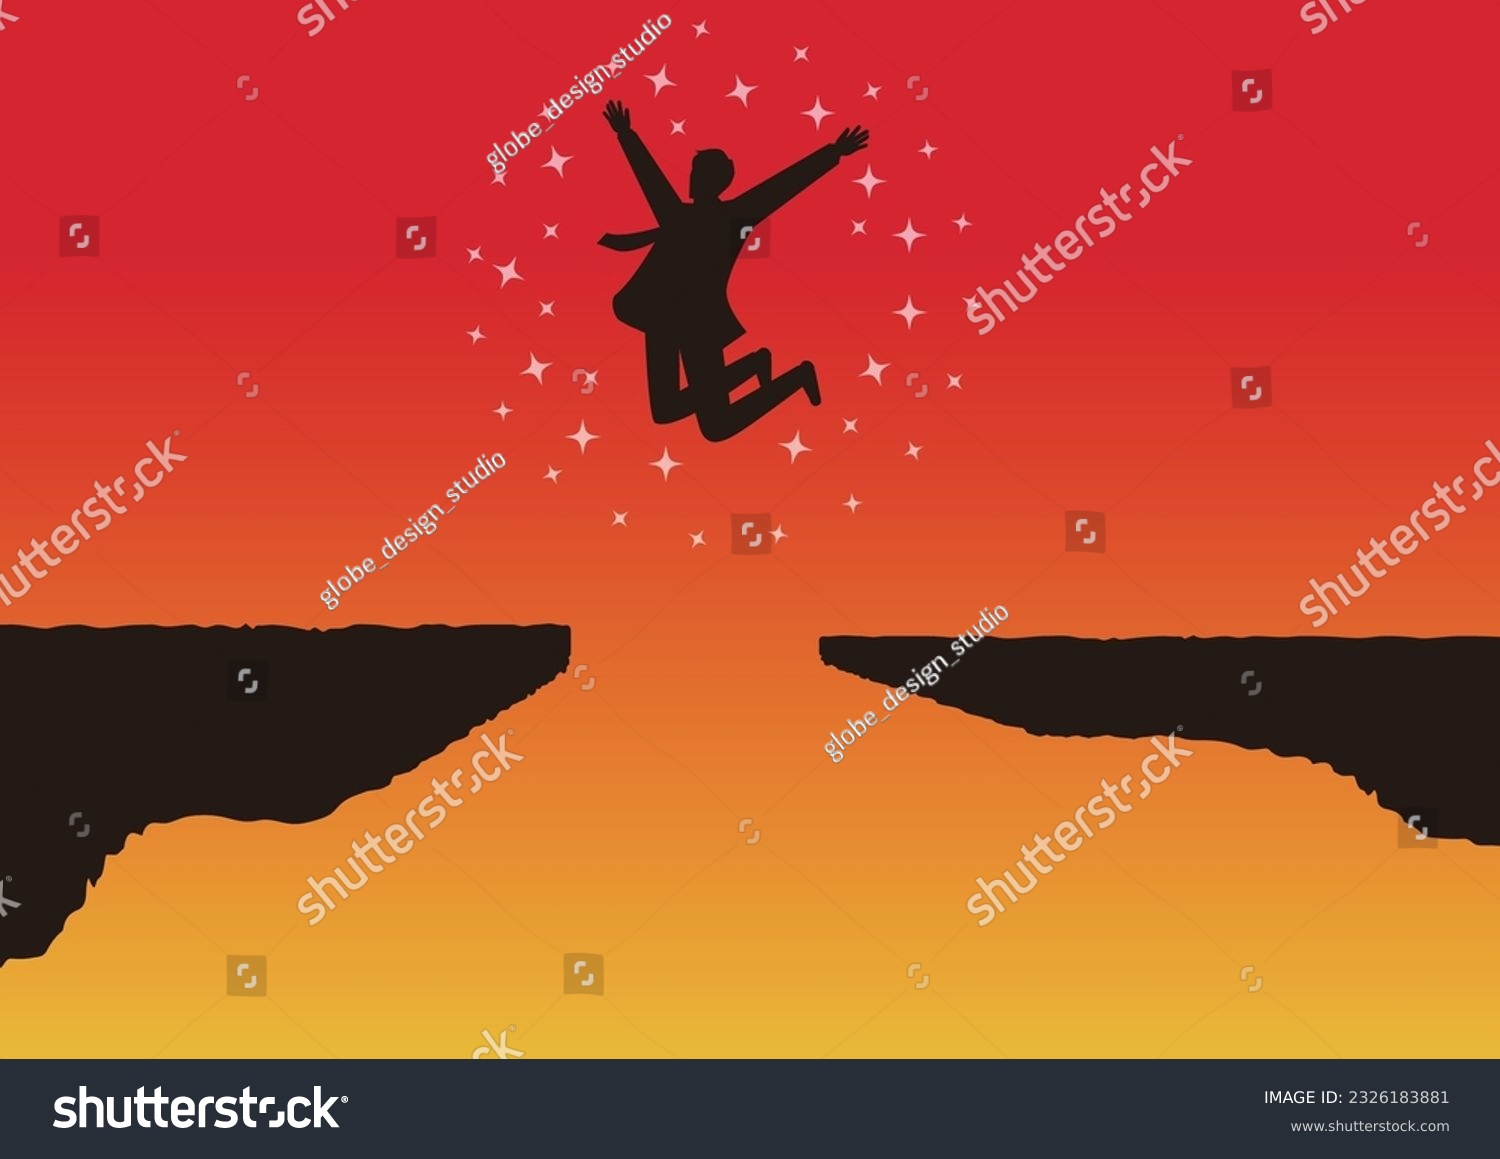 Business image A silhouette illustration of a businessman jumping over a cliff. Success, leap, challenge. #2326183881